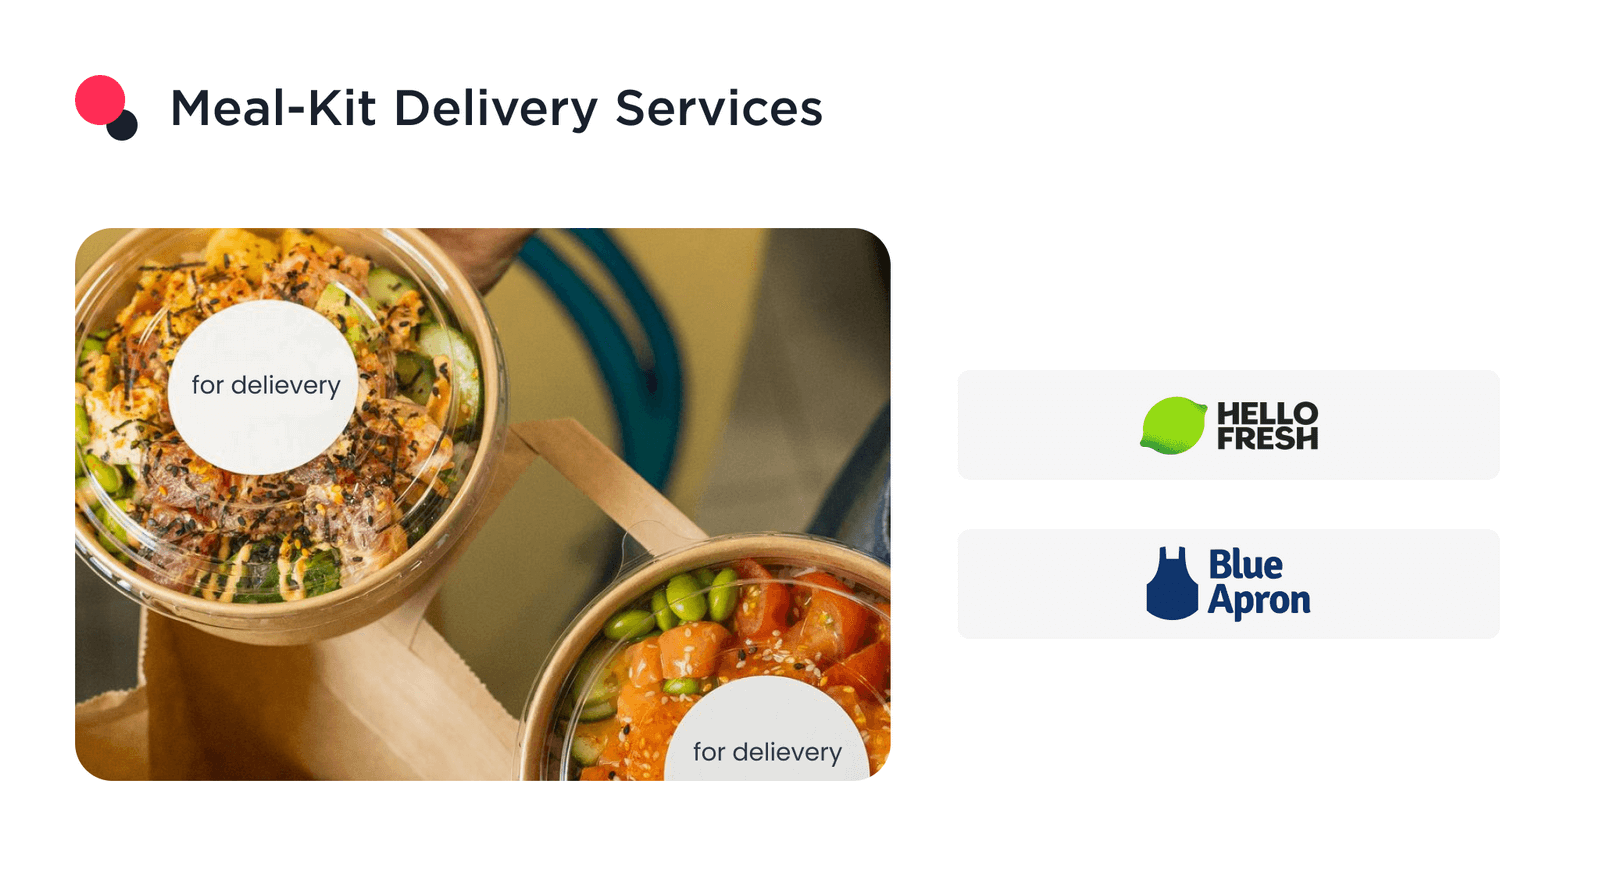 the image shows the meal-kit delivery services